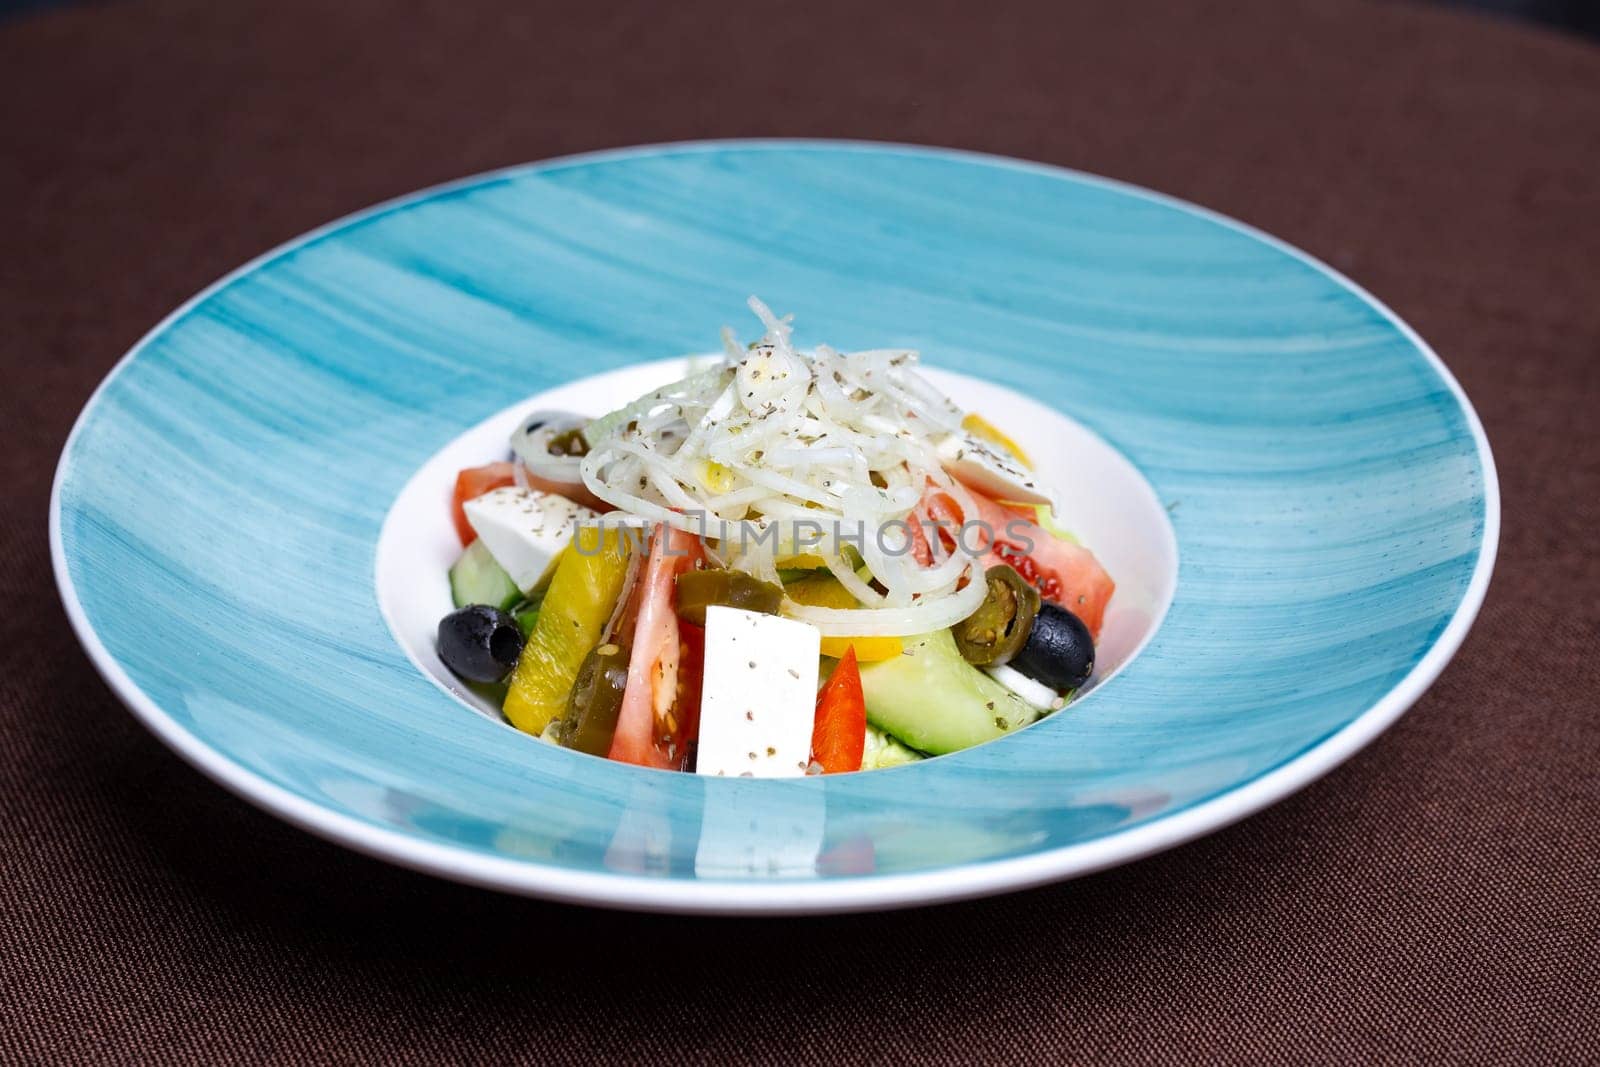 Healthy Greek salad with fresh tomatoes, cucumbers, olives, feta cheese, vinaigrette. Delicious and light